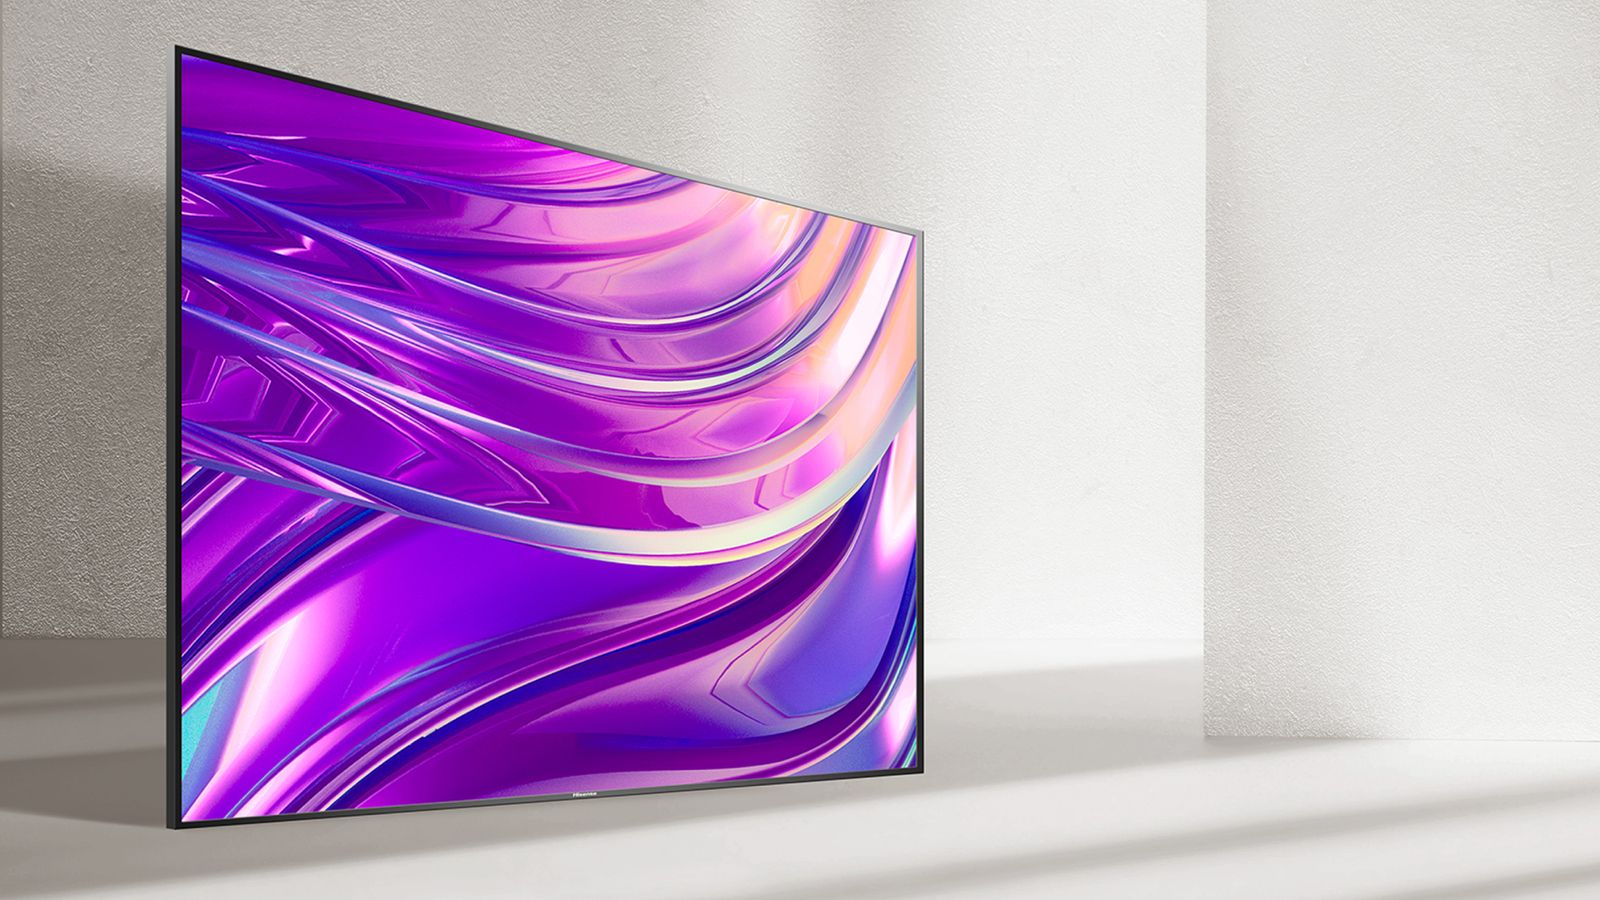 Hisense 55U8H product image of a flatscreen TV in a grey room with a purple flowing pattern on the display.